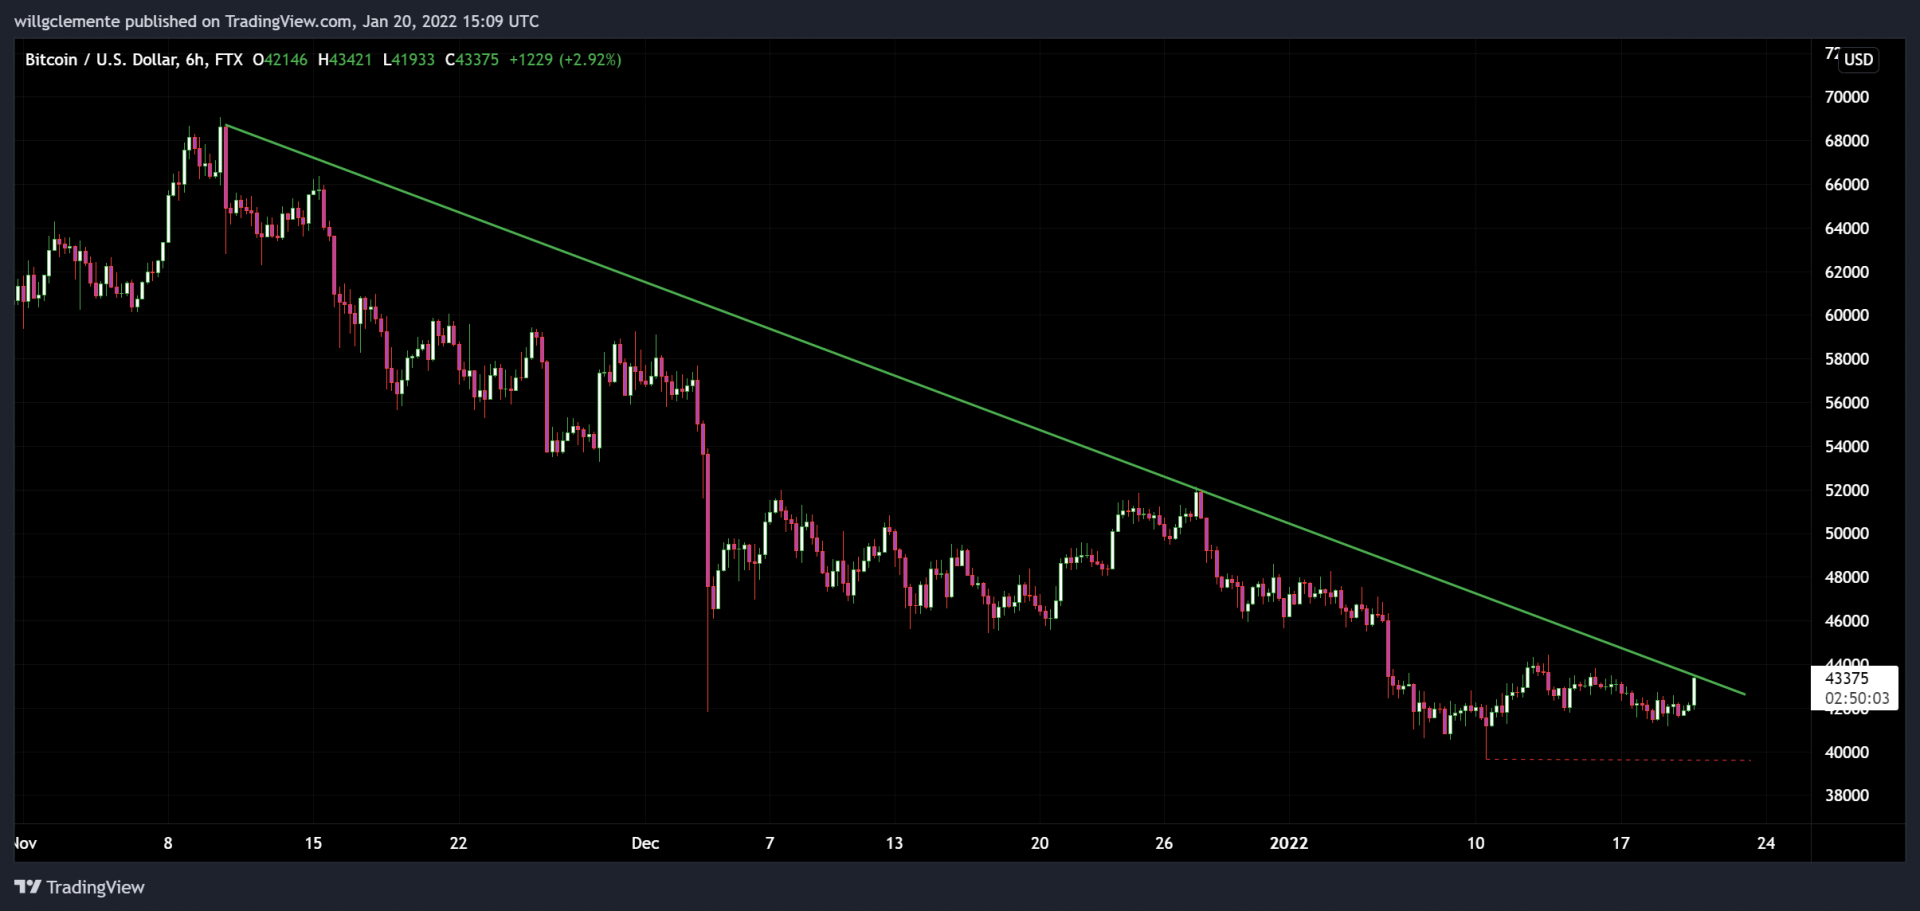 Bitcoin's attempt to break the downtrend for more than 2 months